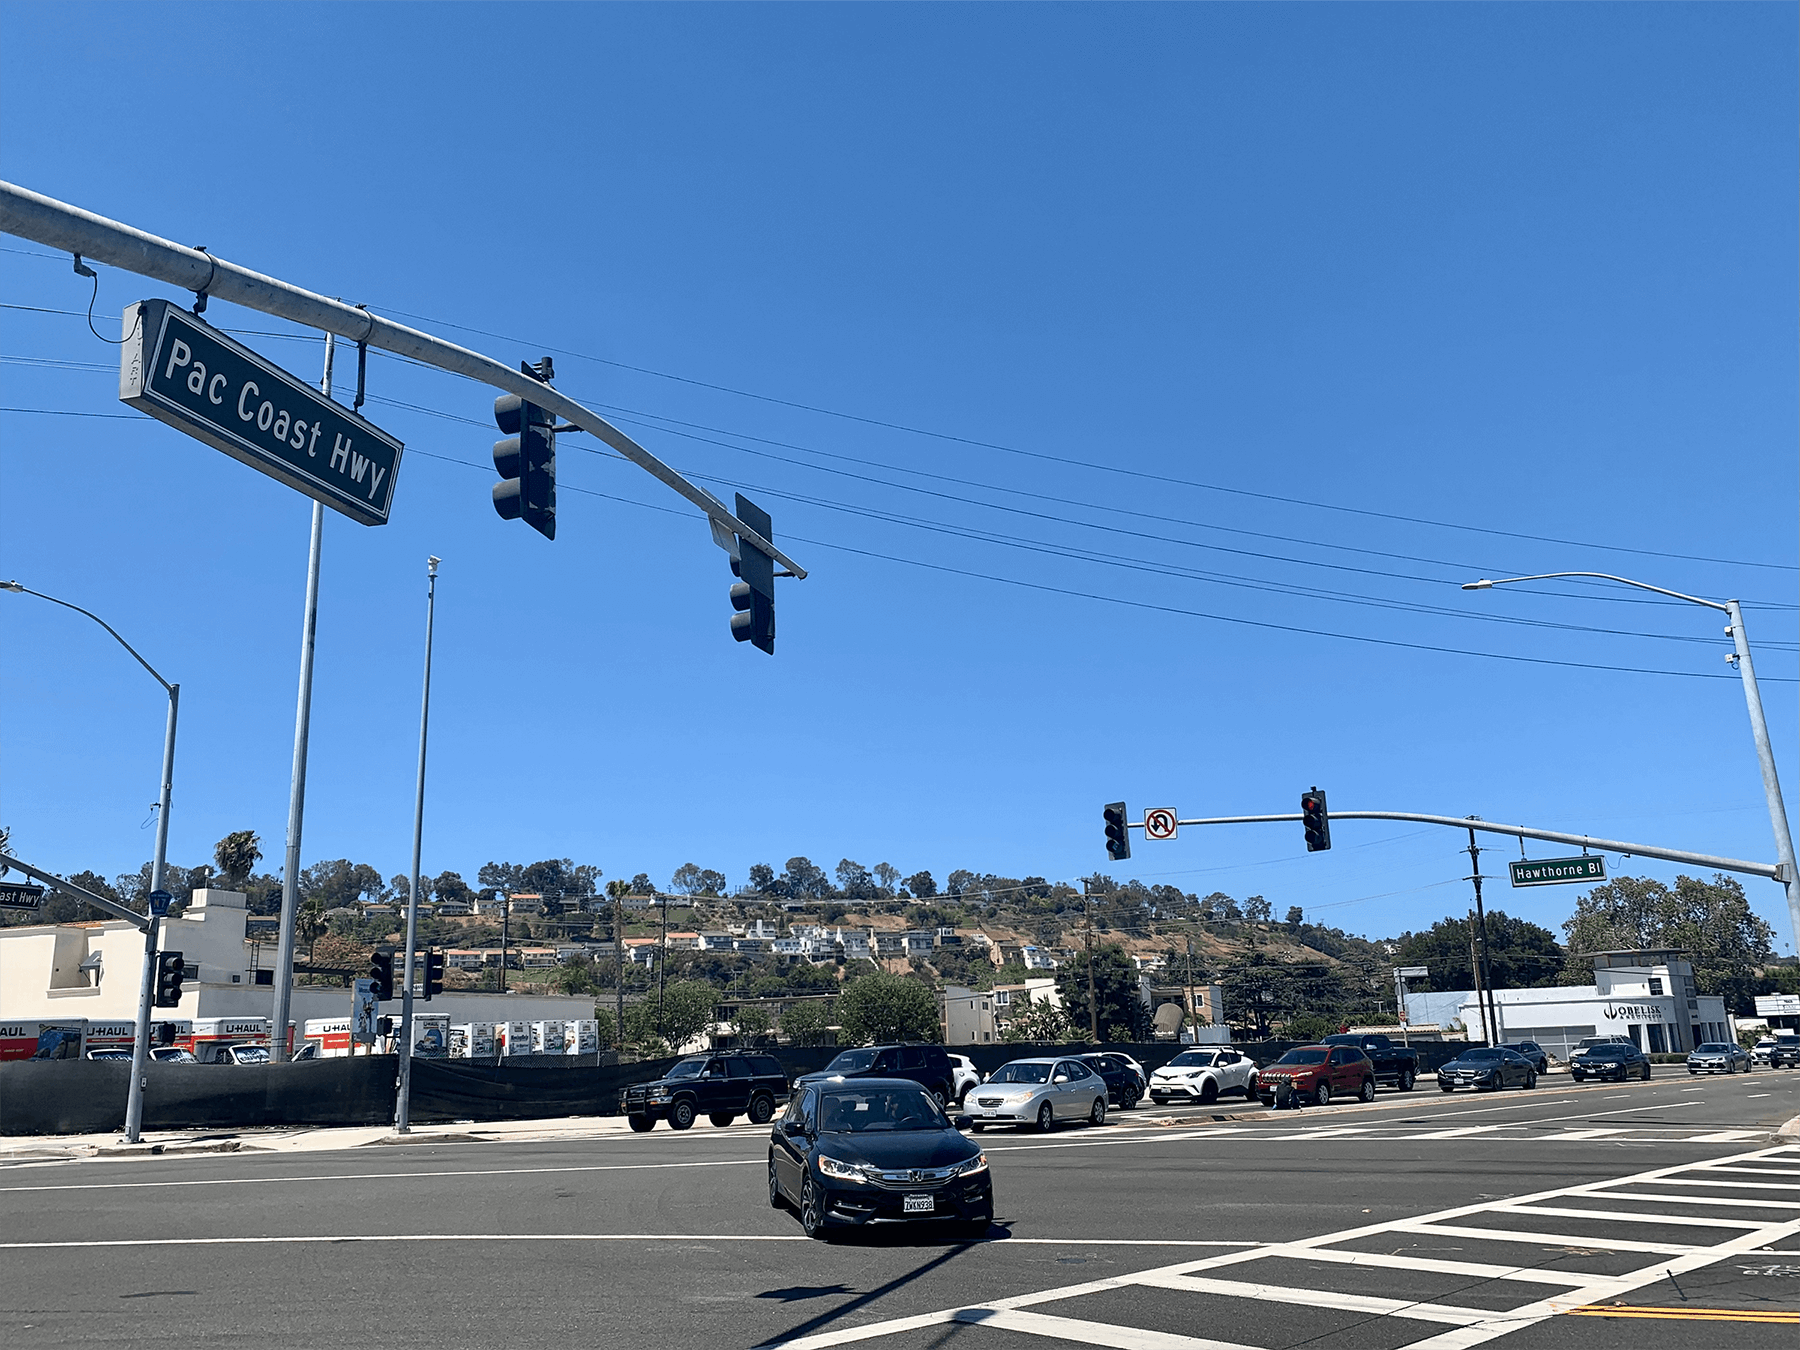 A wideshot of the instersection of PCH & HawthorneBlvd., focusing on the PCH Street Sign